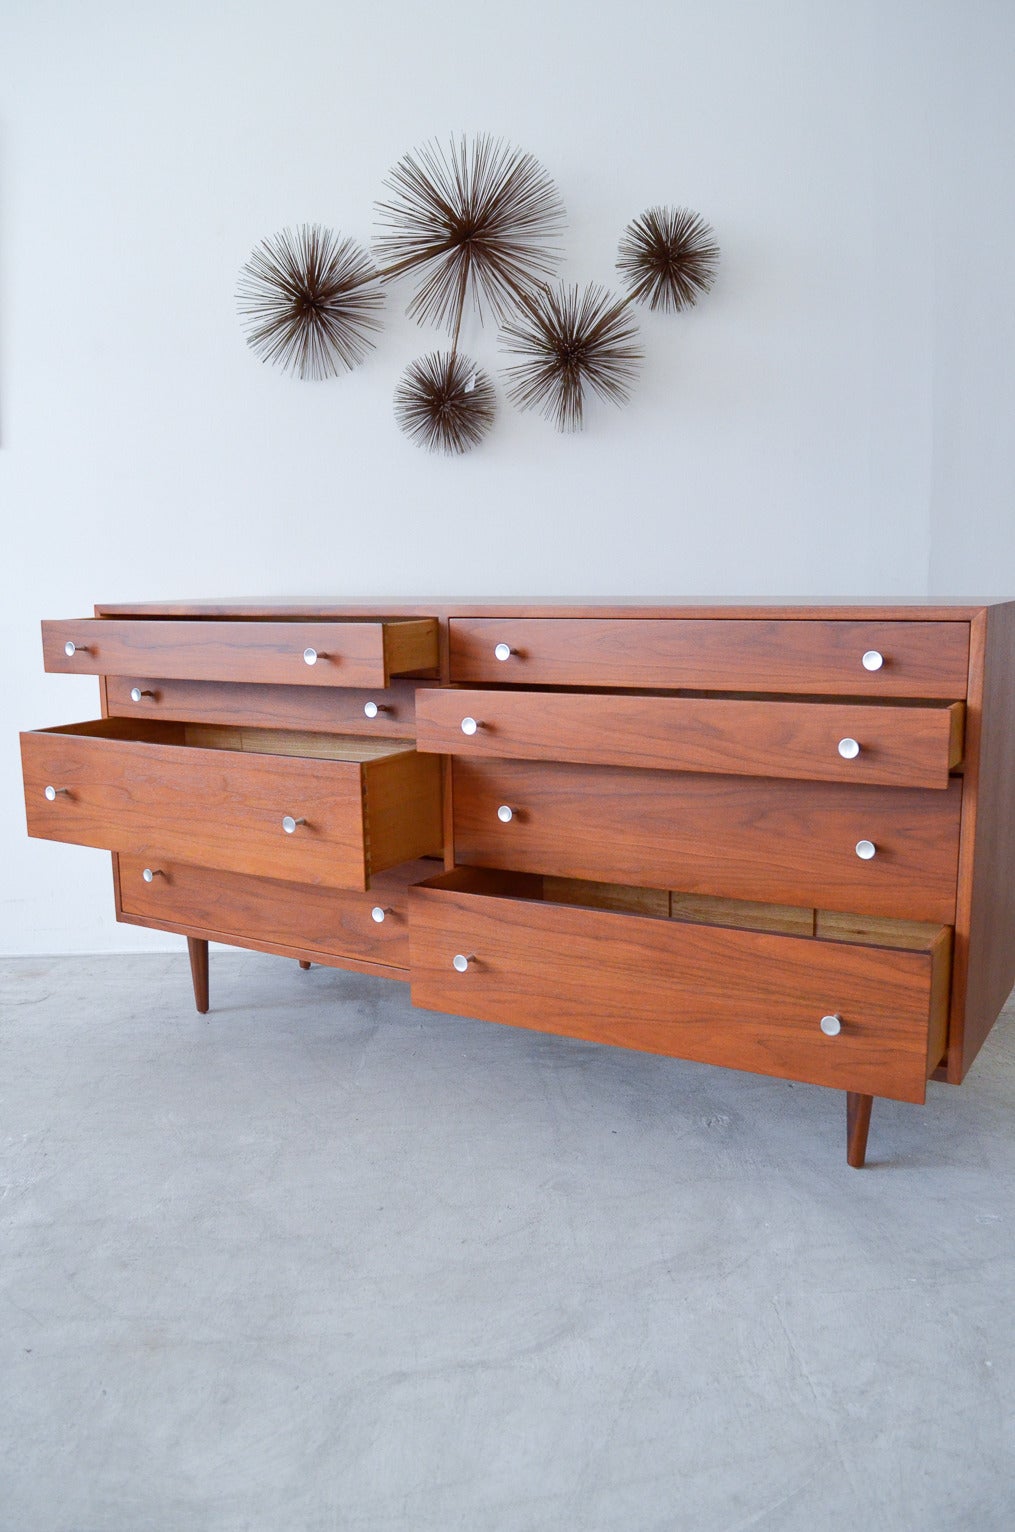 Classic and desirable, this beautiful Milo Baughman for Glenn of California eight-drawer dresser has the original brushed aluminum pulls. Would look amazing in a living room as a credenza or in a bedroom as a dresser. 

Professionally restored and